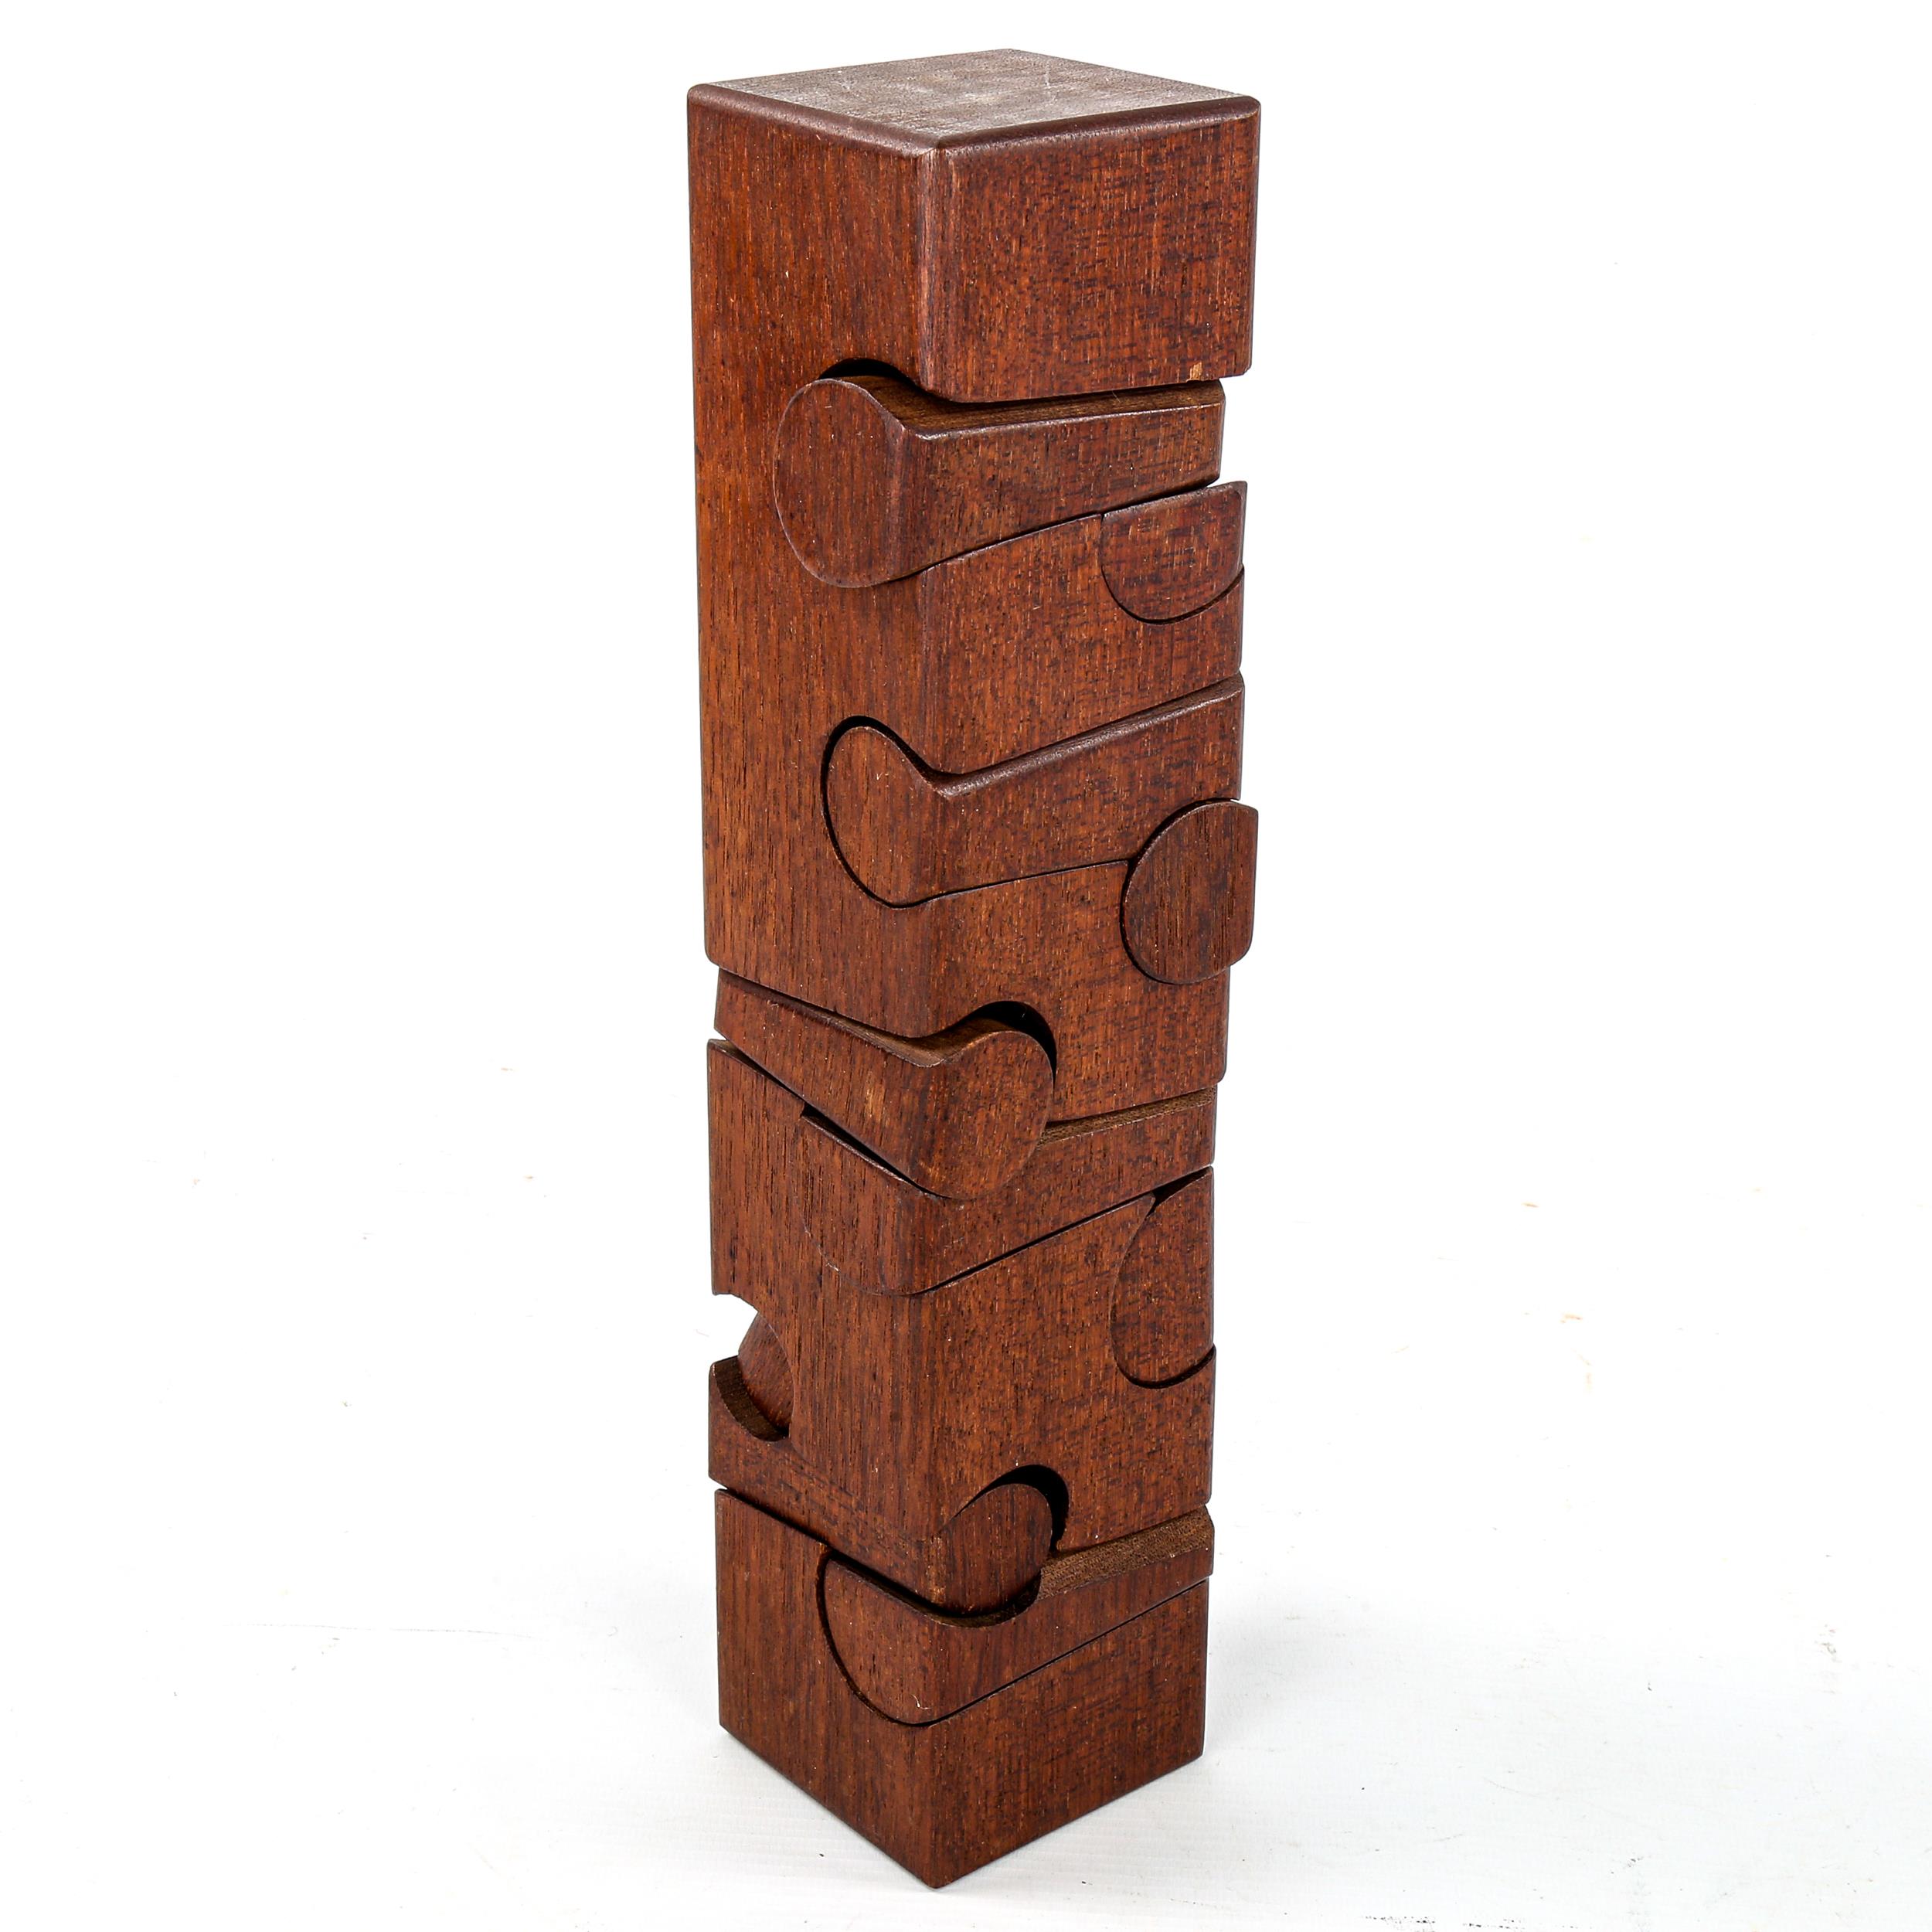 BRIAN WILLSHER, wood peg puzzle sculpture, height 33CM Good condition, pegs are loose in sculpture.